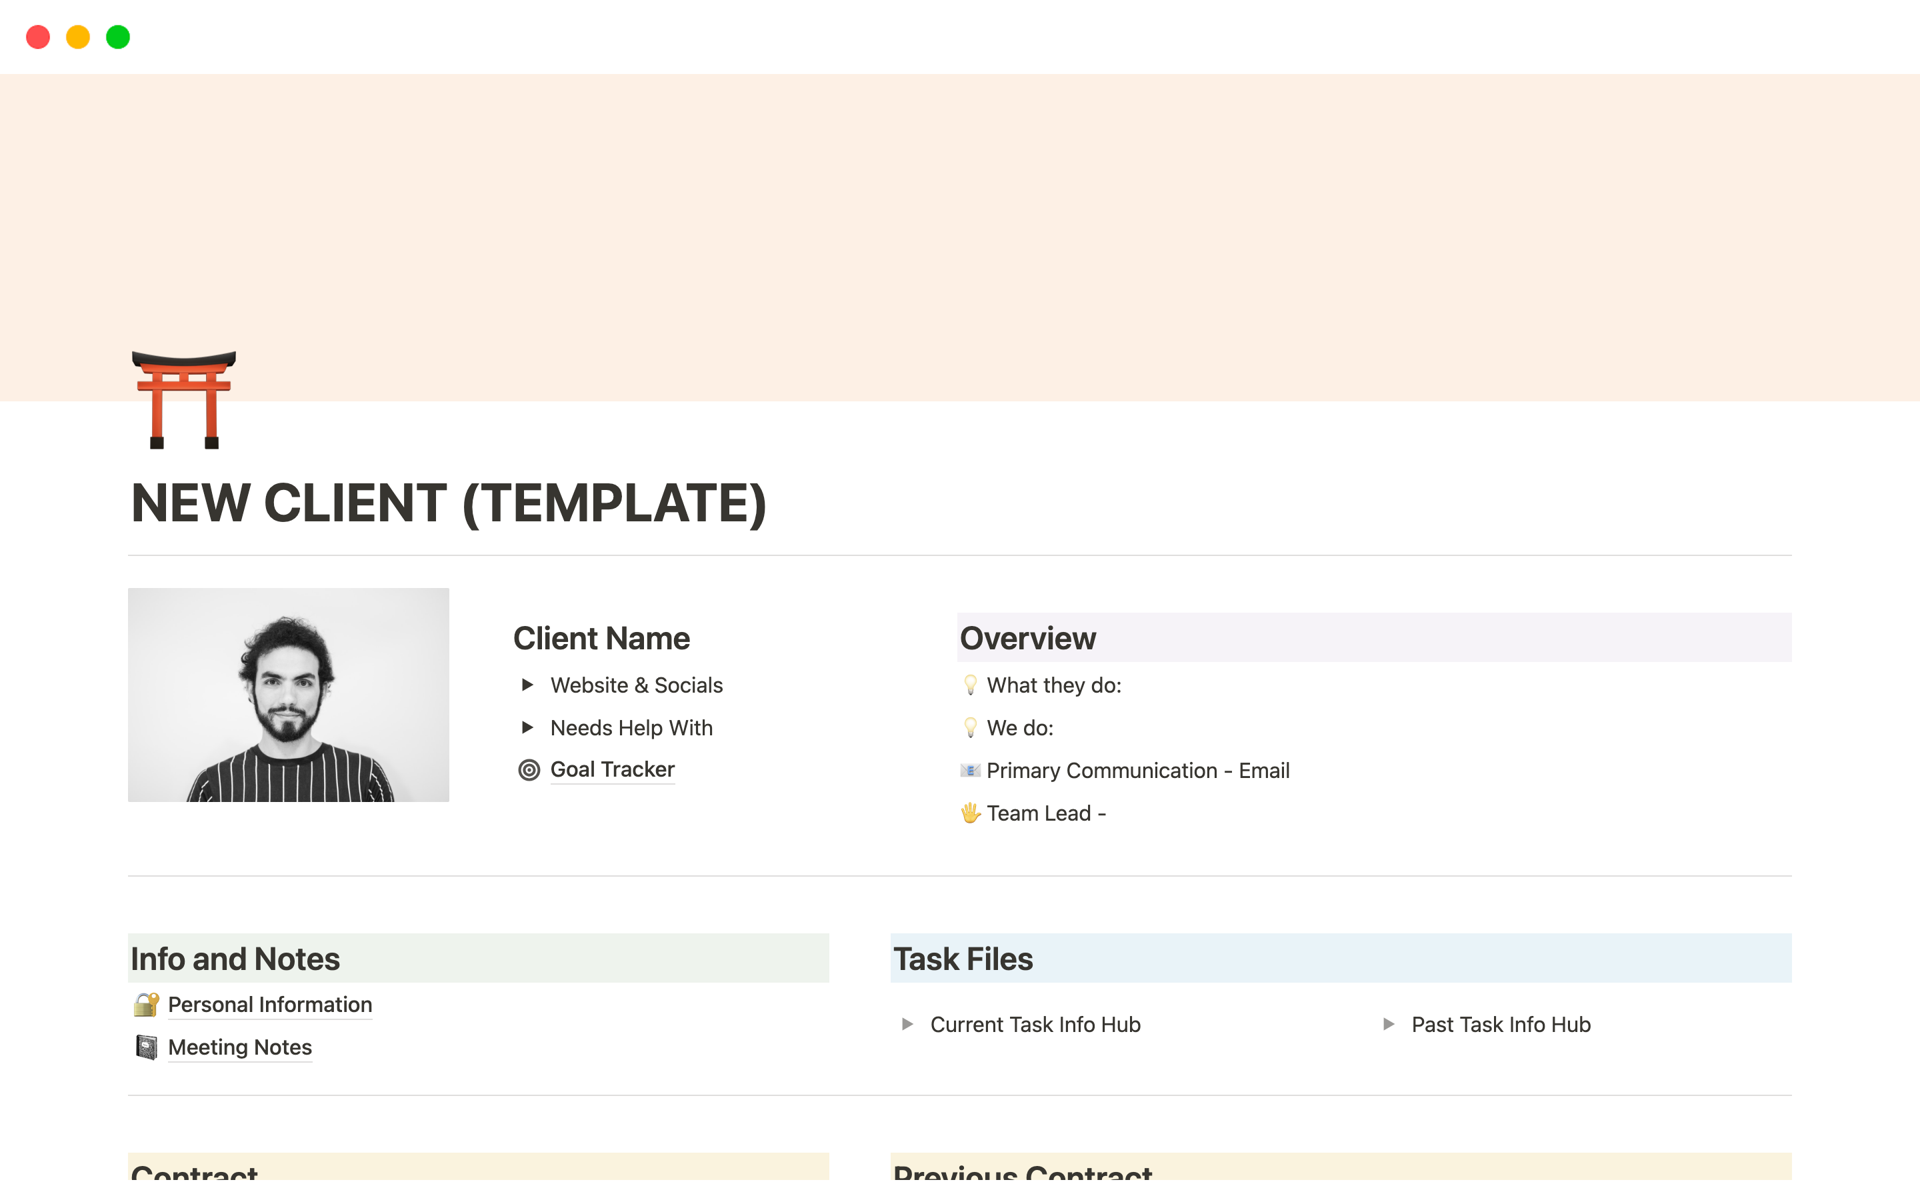 The customizable new client information template simplifies organization, allowing easy addition and adjustment of essential details as needed.